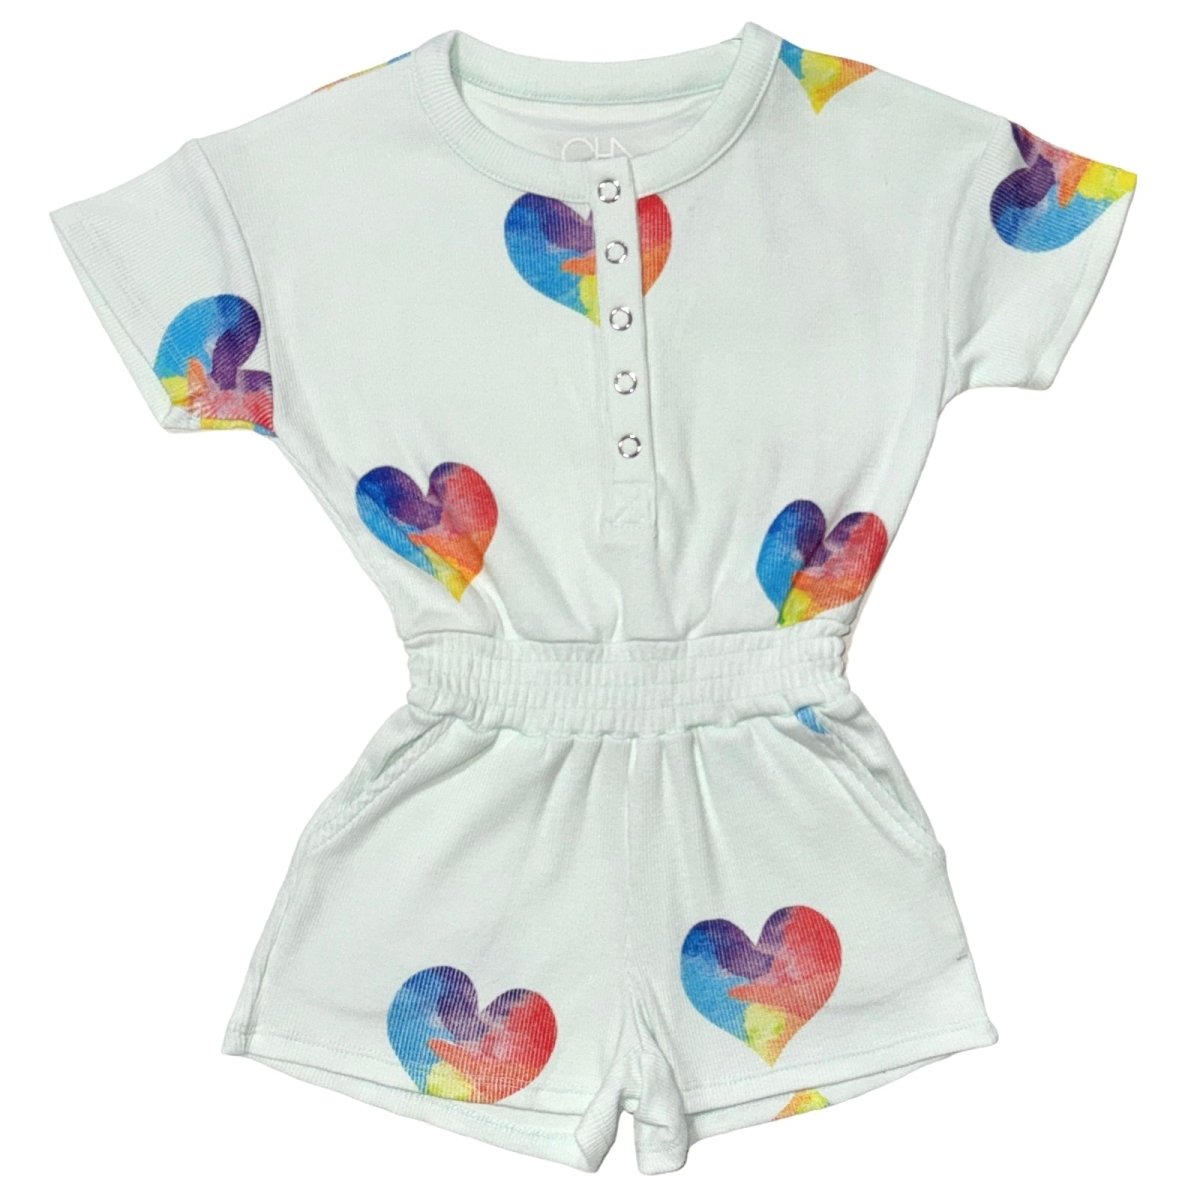 RAINBOW HEARTS RIBBED ROMPER - CHASER KIDS